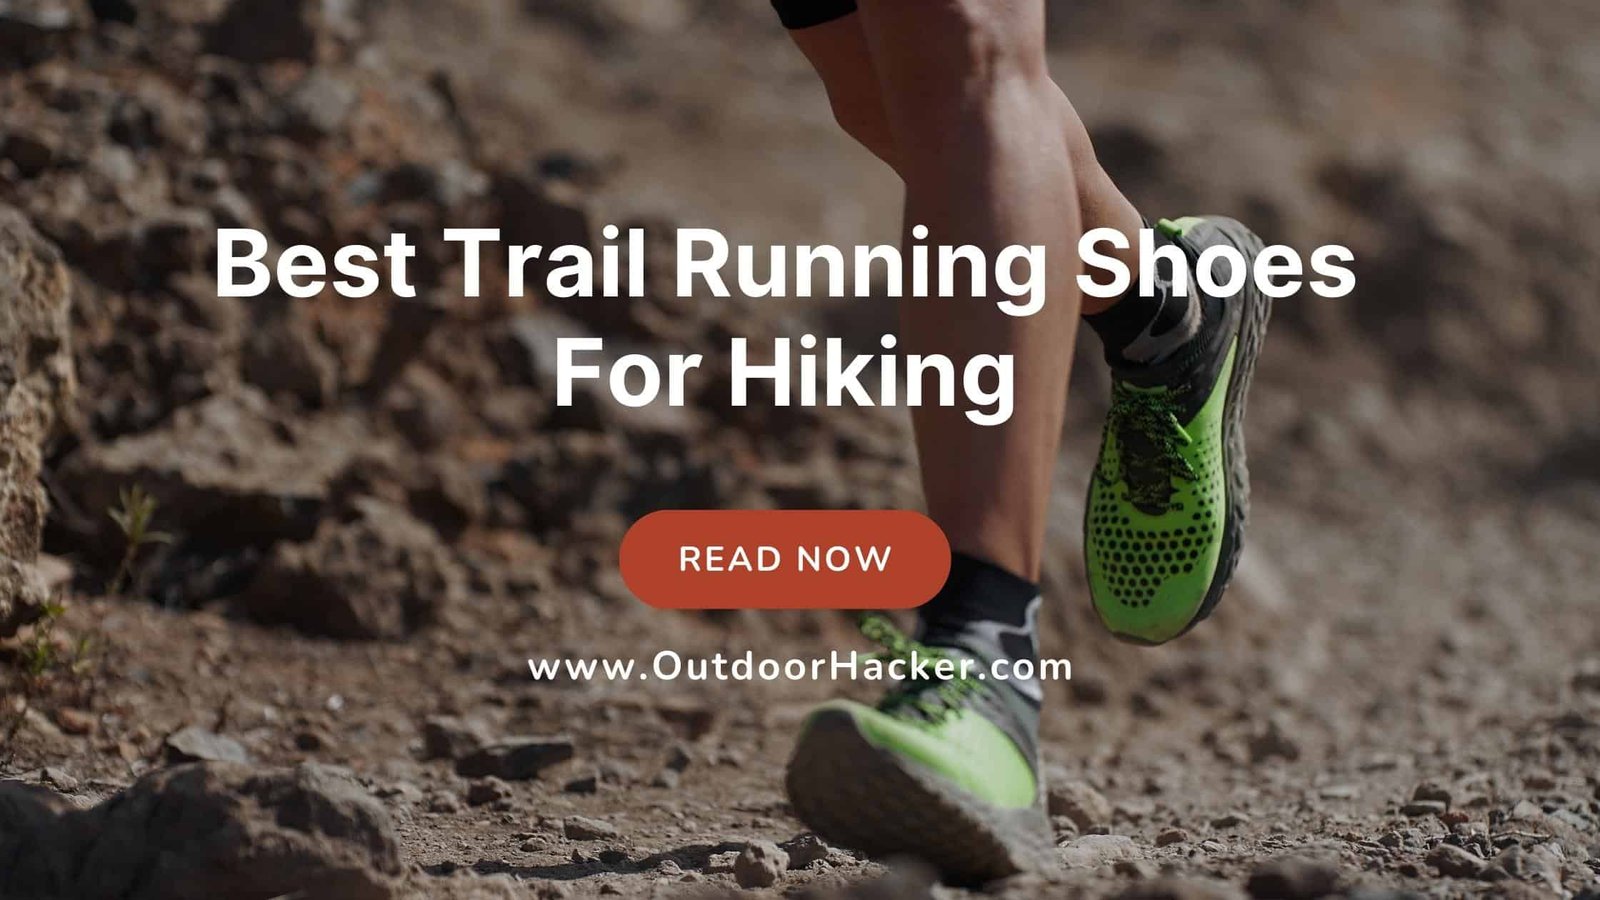 Best Trail Running Shoes For Hiking